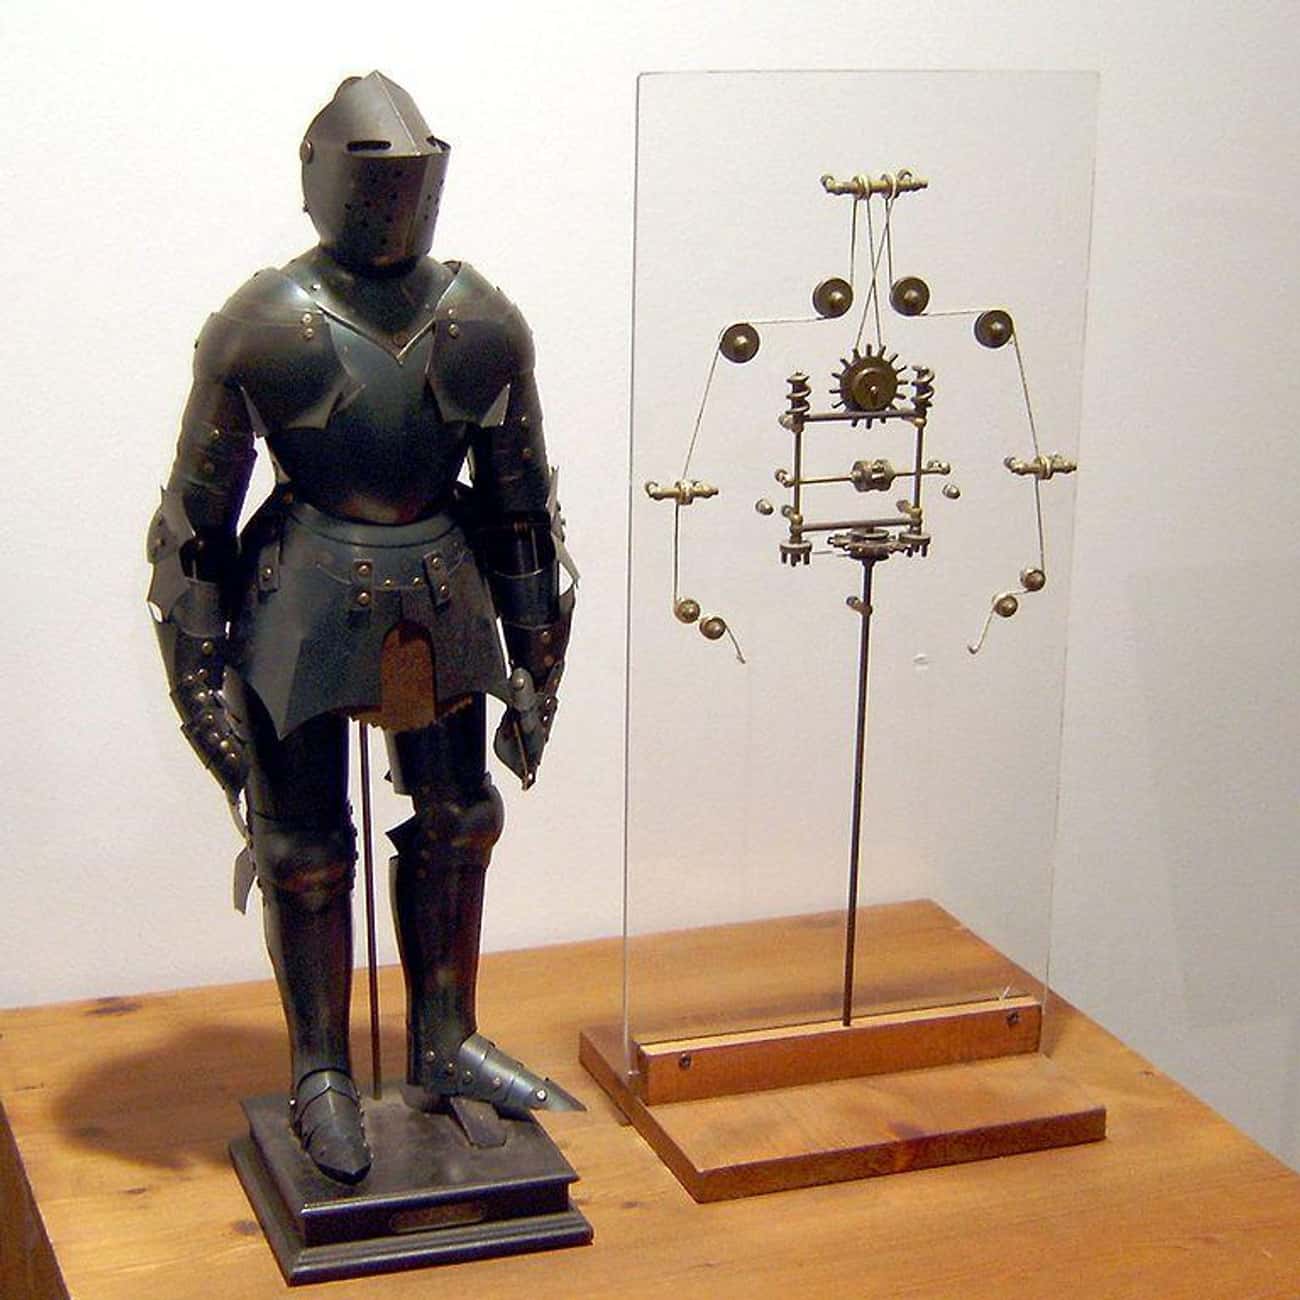 A Mechanical Knight Would Have Used Cables And Pulleys To Move